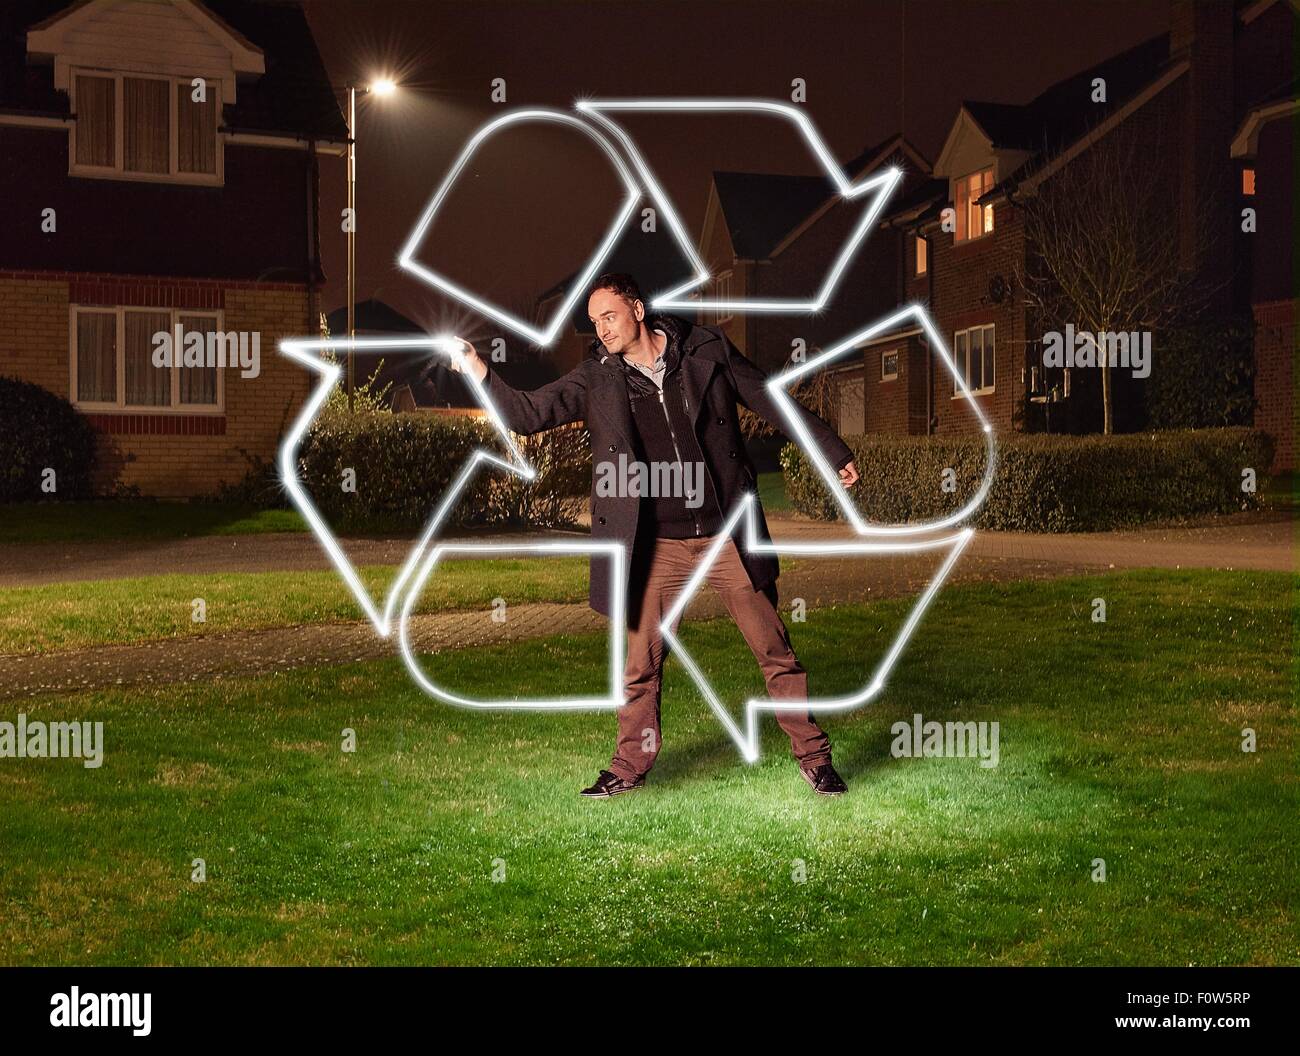 Artist light painting a recycling symbol in park Stock Photo